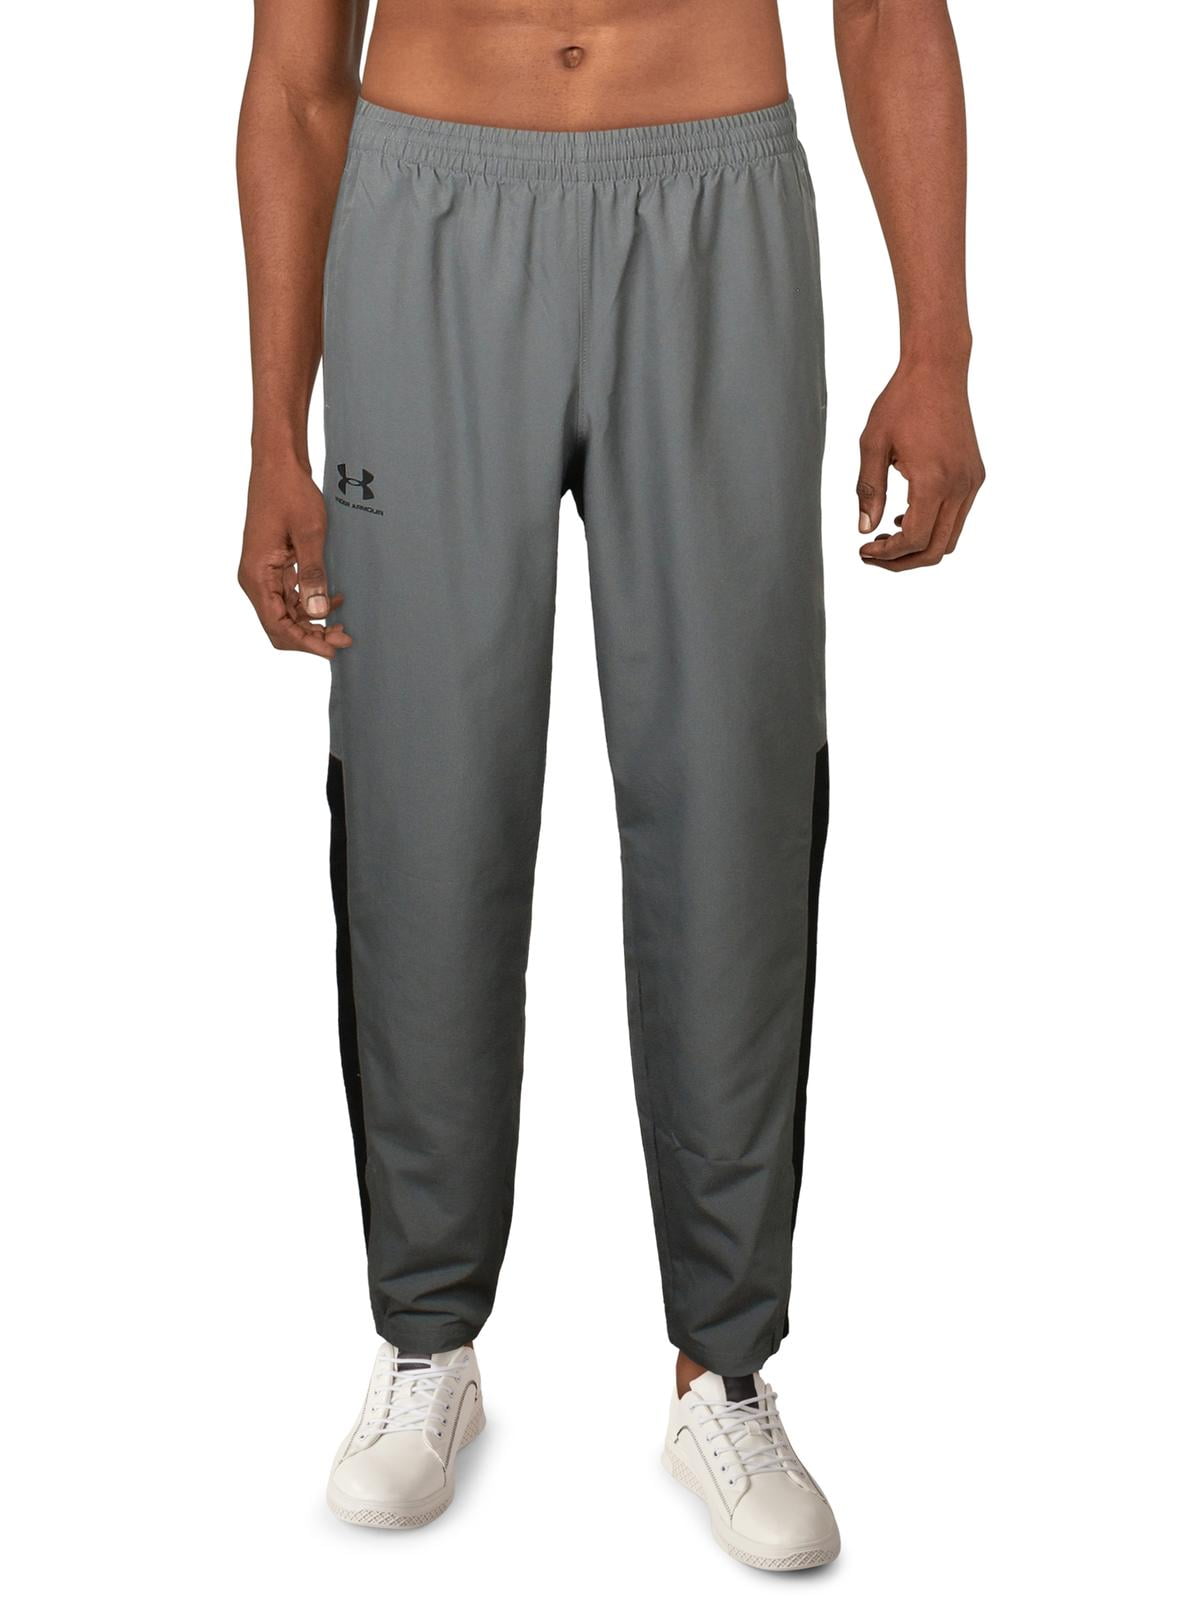 Under Armour Mens Loose Fit Windpant Track Pants Gray M